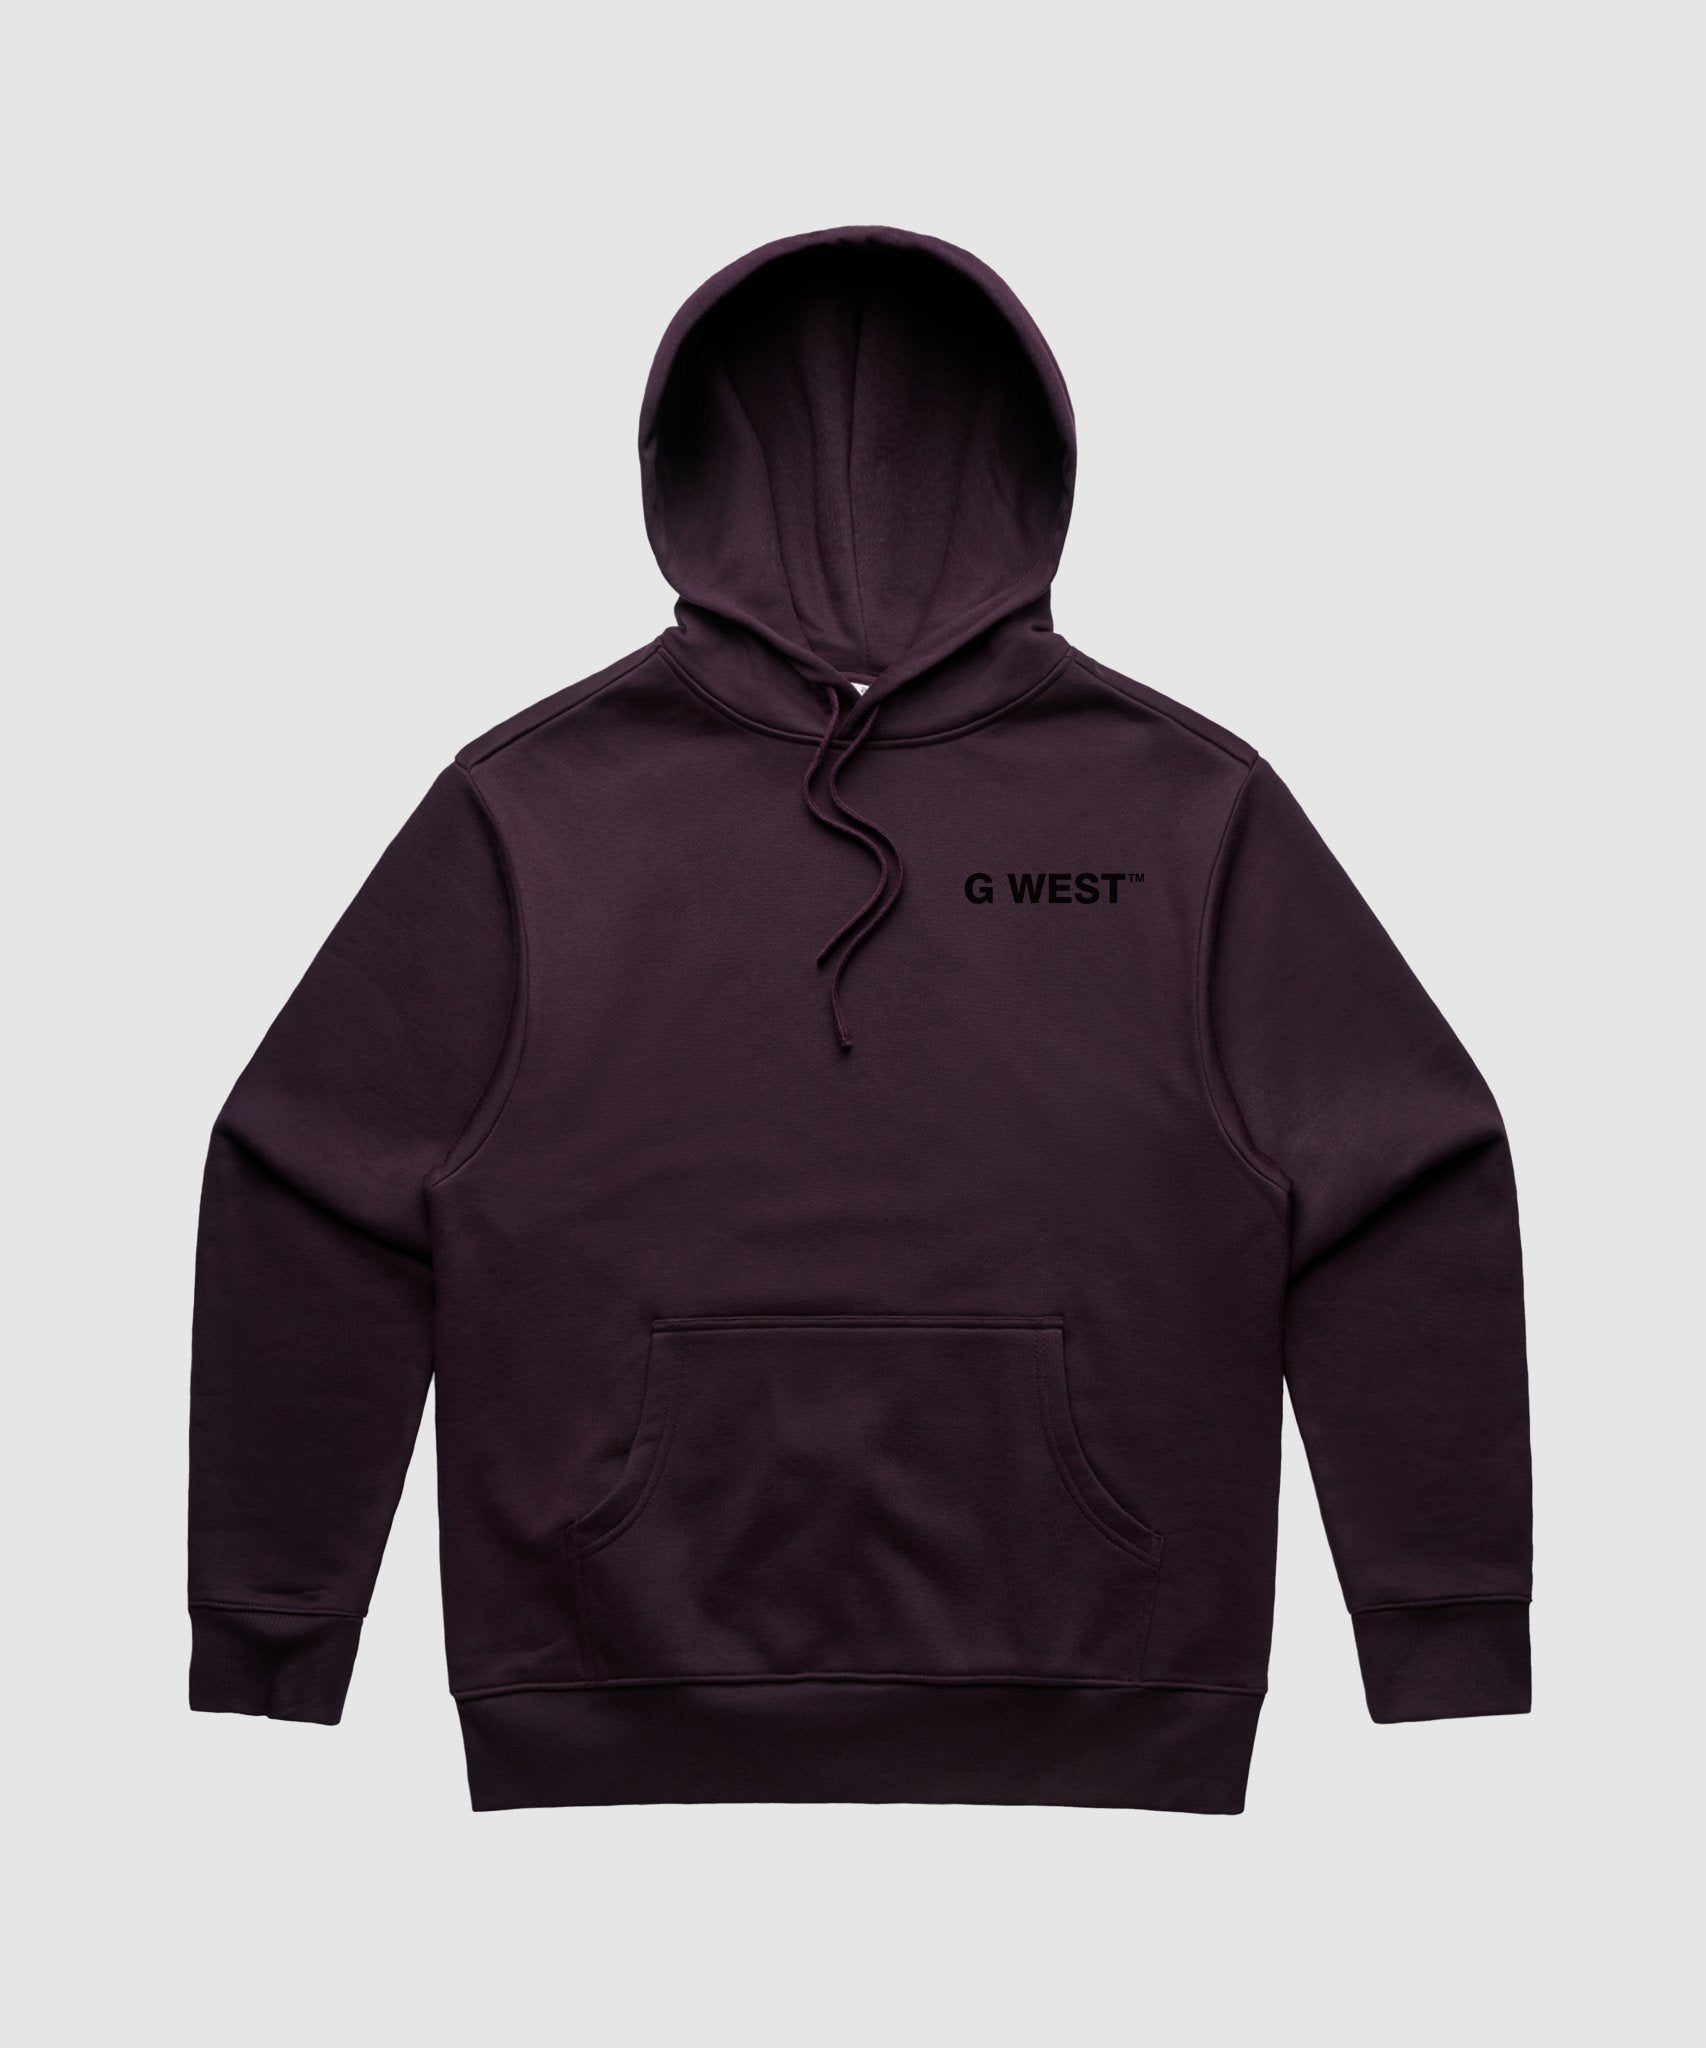 G WEST POISON GAME HEAVY PREMIUM HOODIE - 6 COLORS - G West